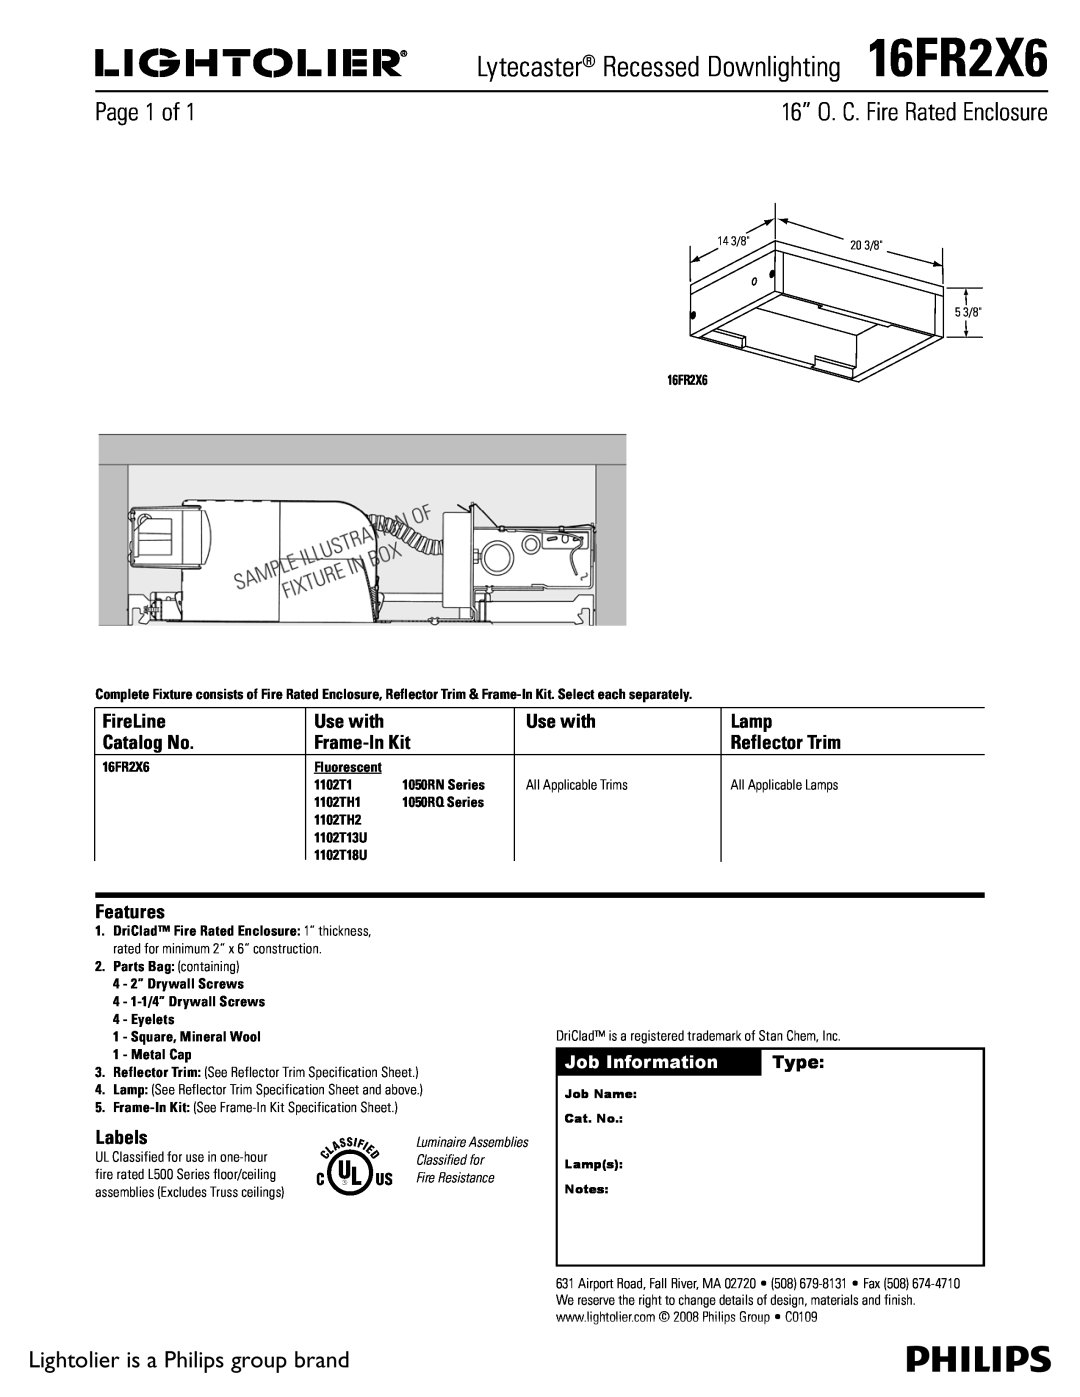 Lightolier specifications Lytecaster Recessed Downlighting16FR2X6, 16” O. C. Fire Rated Enclosure, Page 1 of, FireLine 